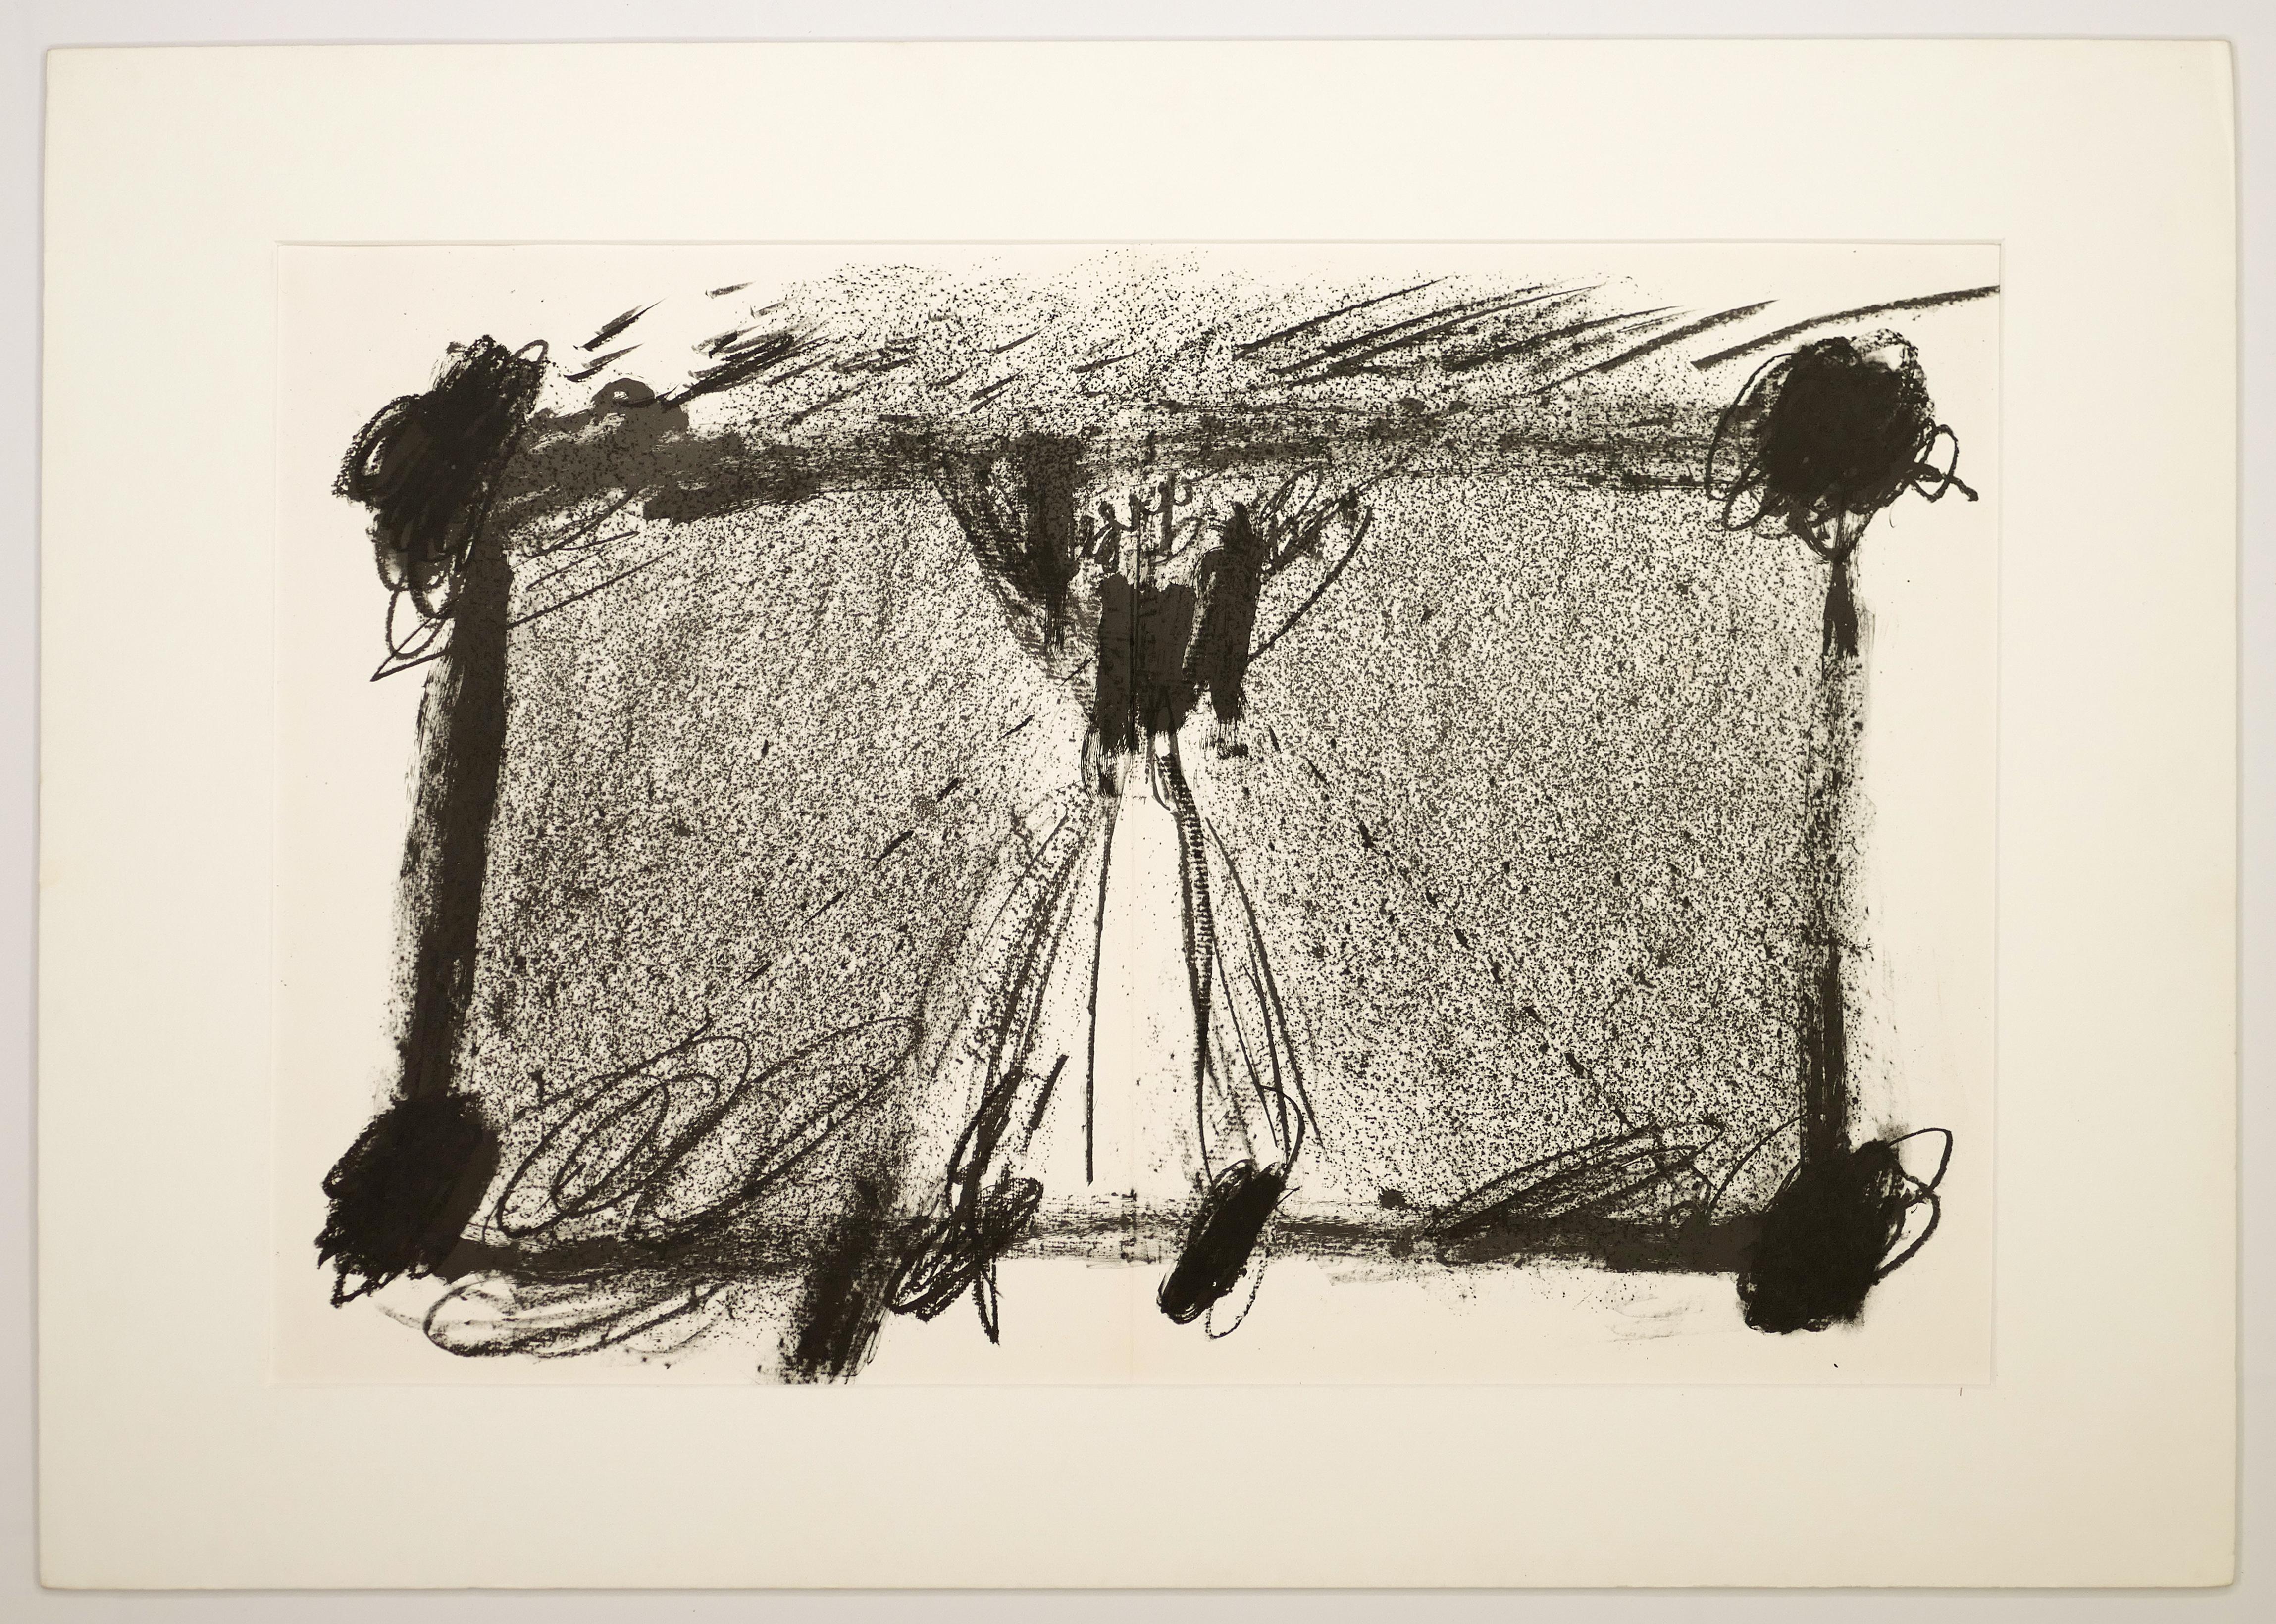 In Two Blacks - Original Lithograph by Antoni Tapies - 1968 - Print by Antoni Tàpies